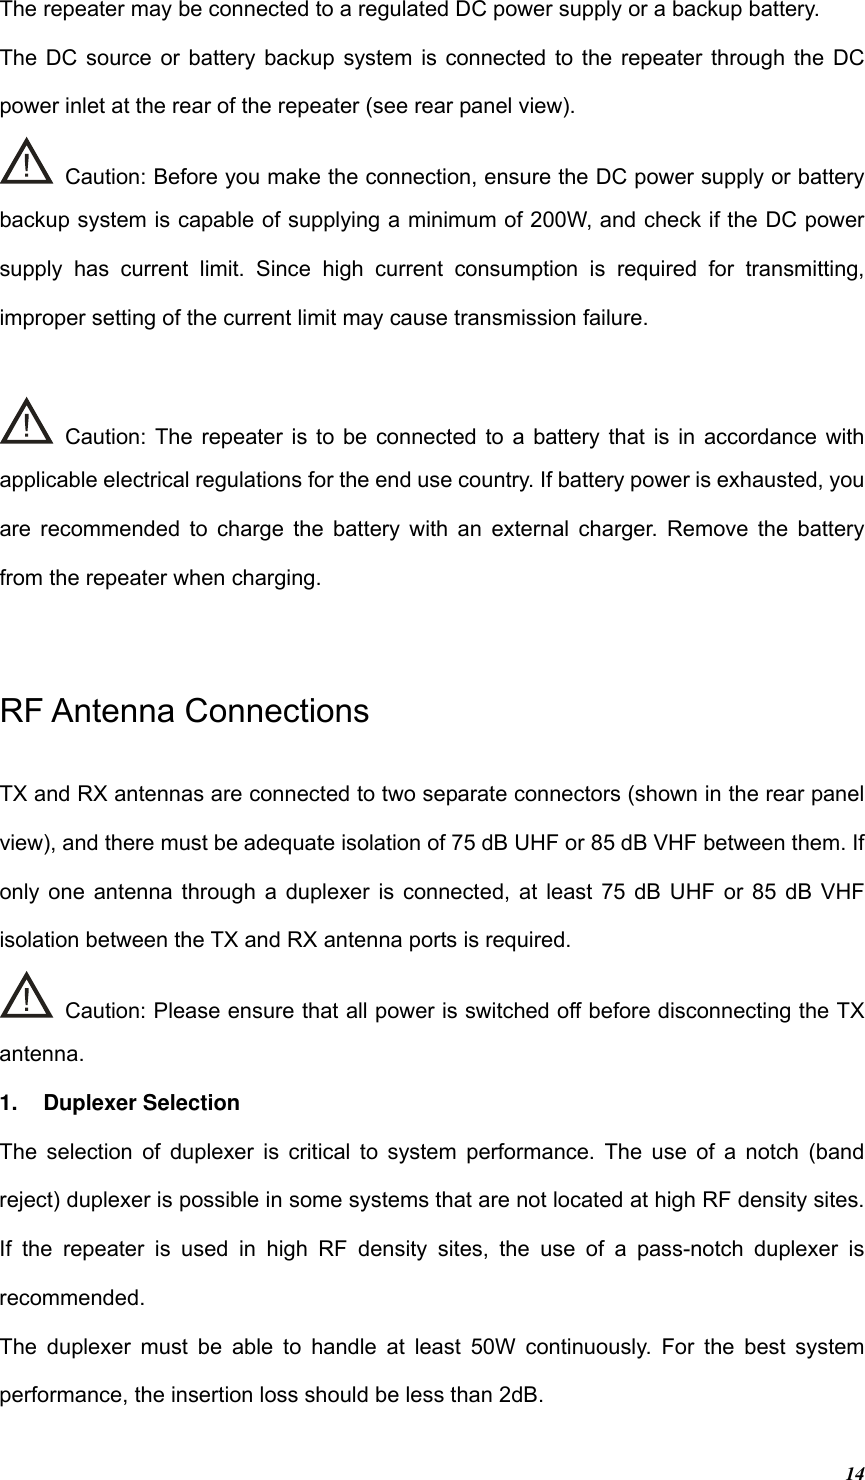 Page 15 of Hytera Communications RD98XSIU5 Digital Repeater User Manual RD98XS Owner s Manual 100202